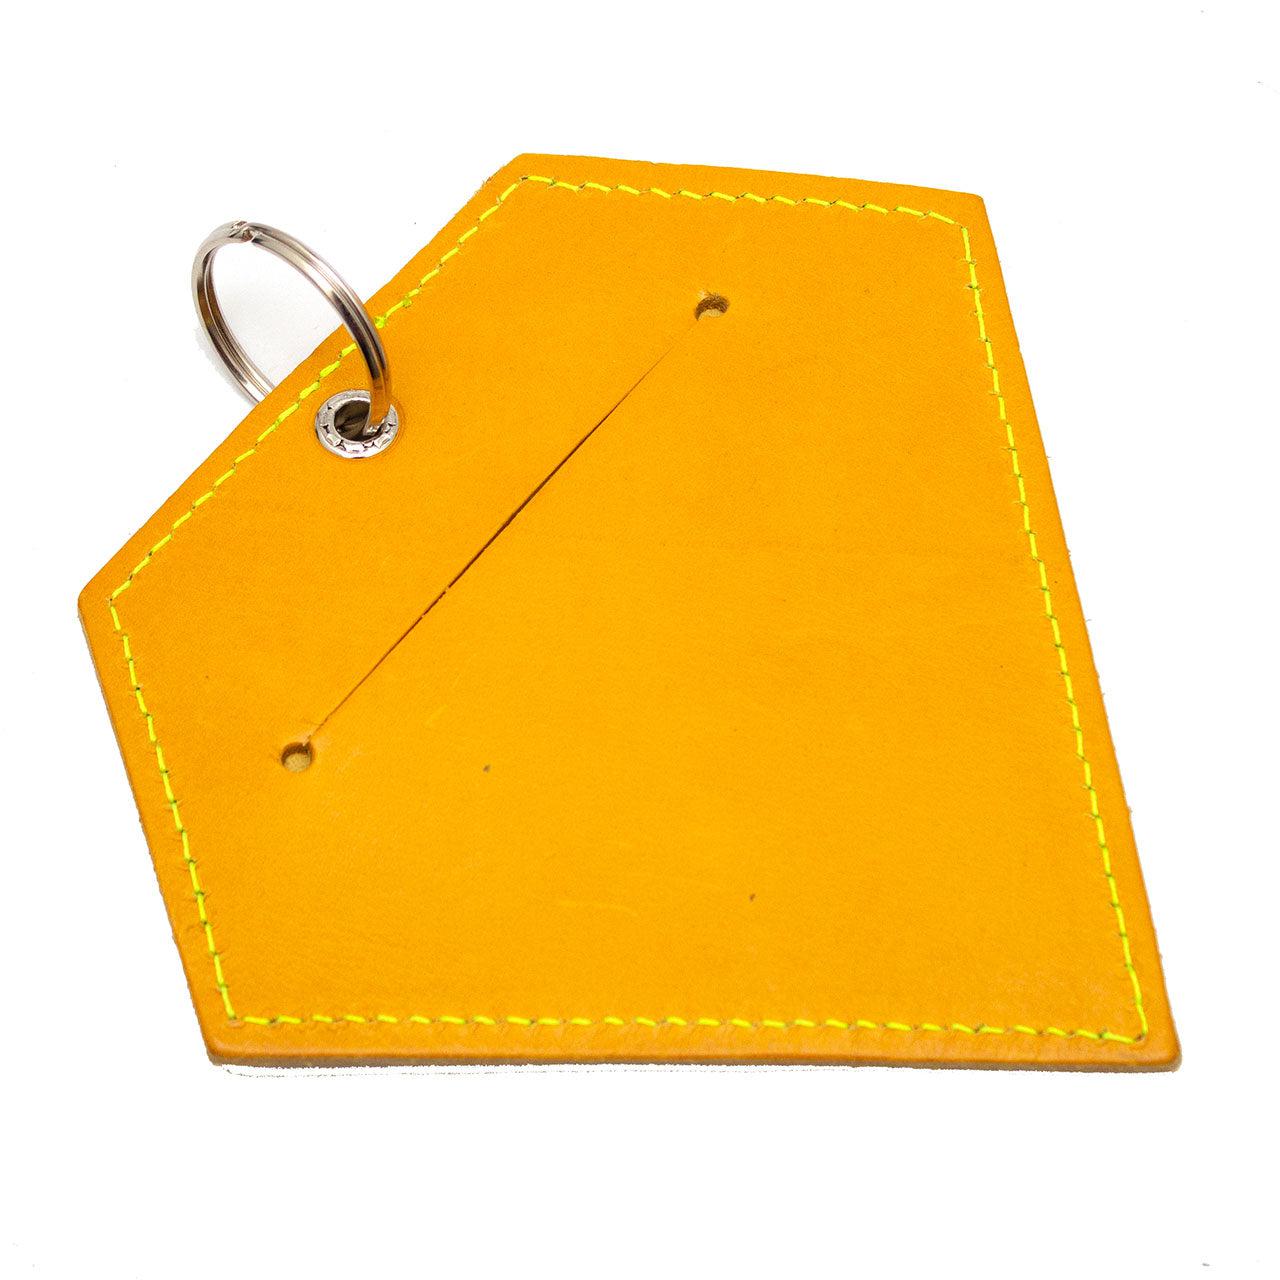 Poo Pouch Diamond 'Yellow Leather'-Poo Pouch-Hiro + Wolf